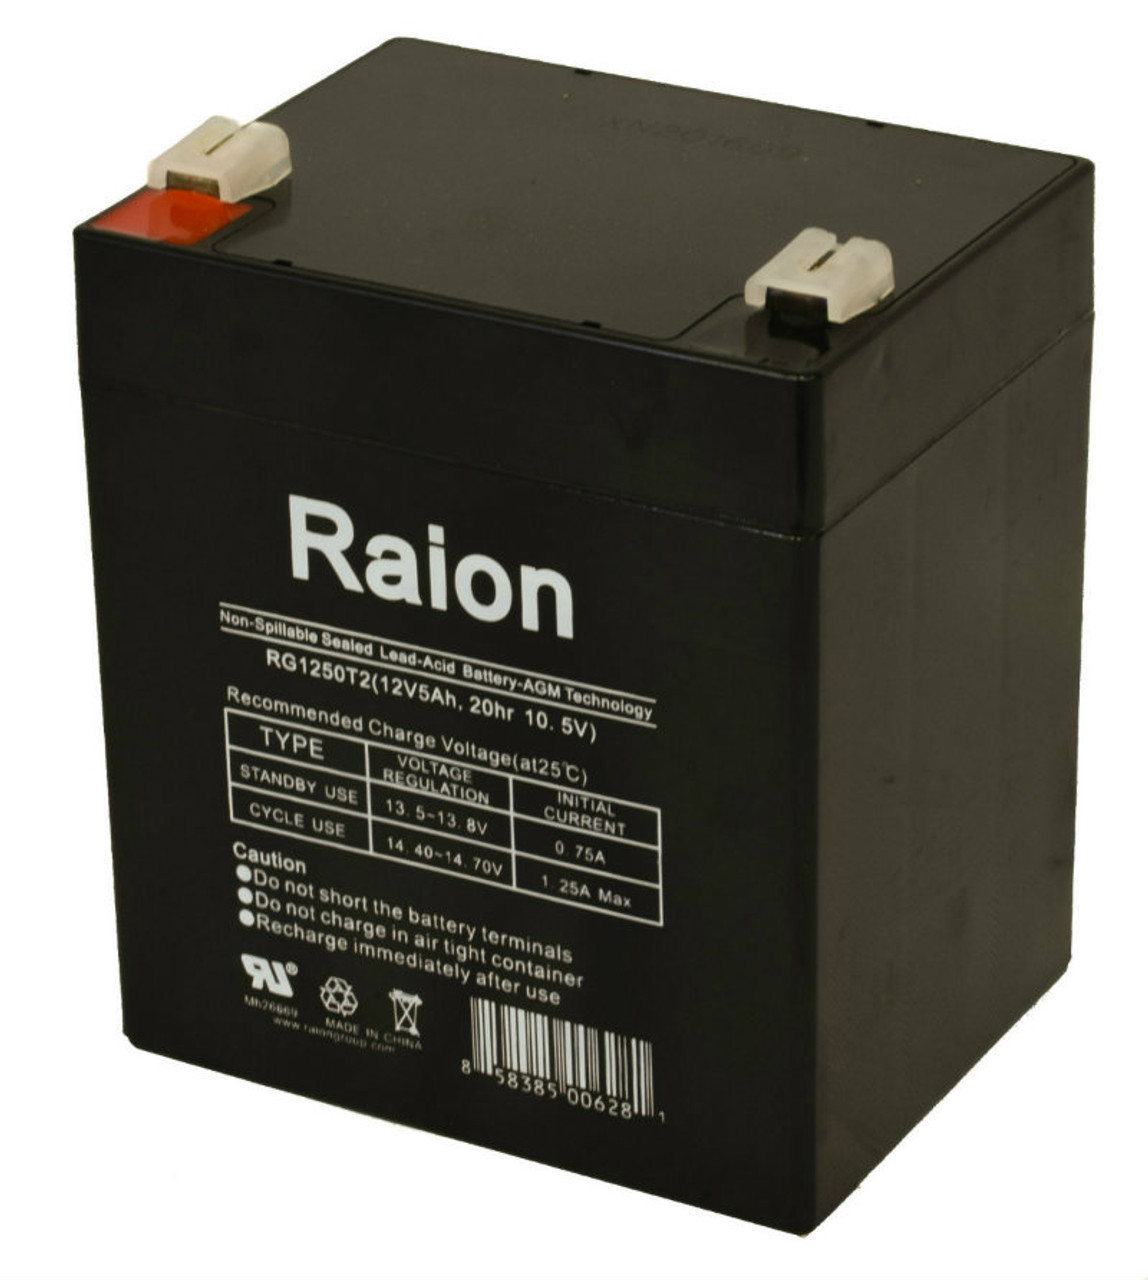 Raion Power RG1250T1 Replacement Battery for Ocean NP5-12 F1